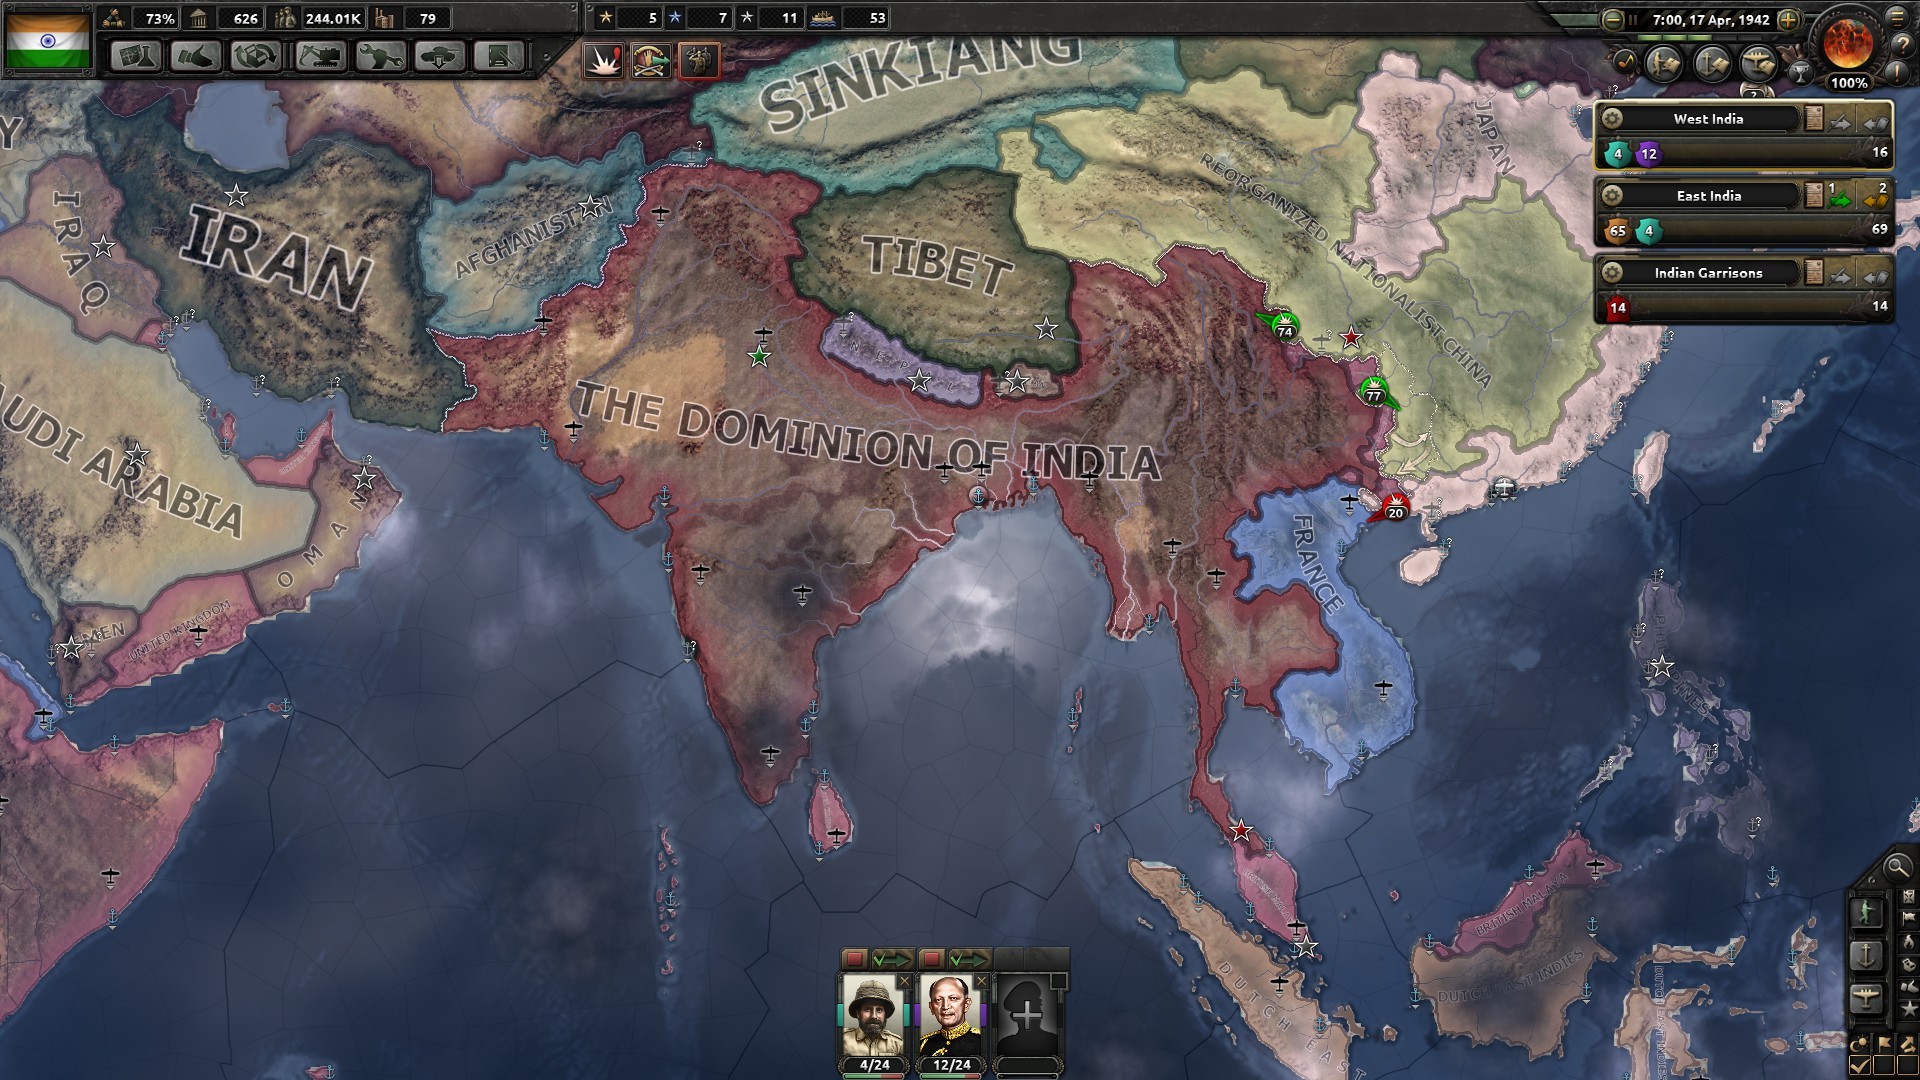 hearts of iron 1 download